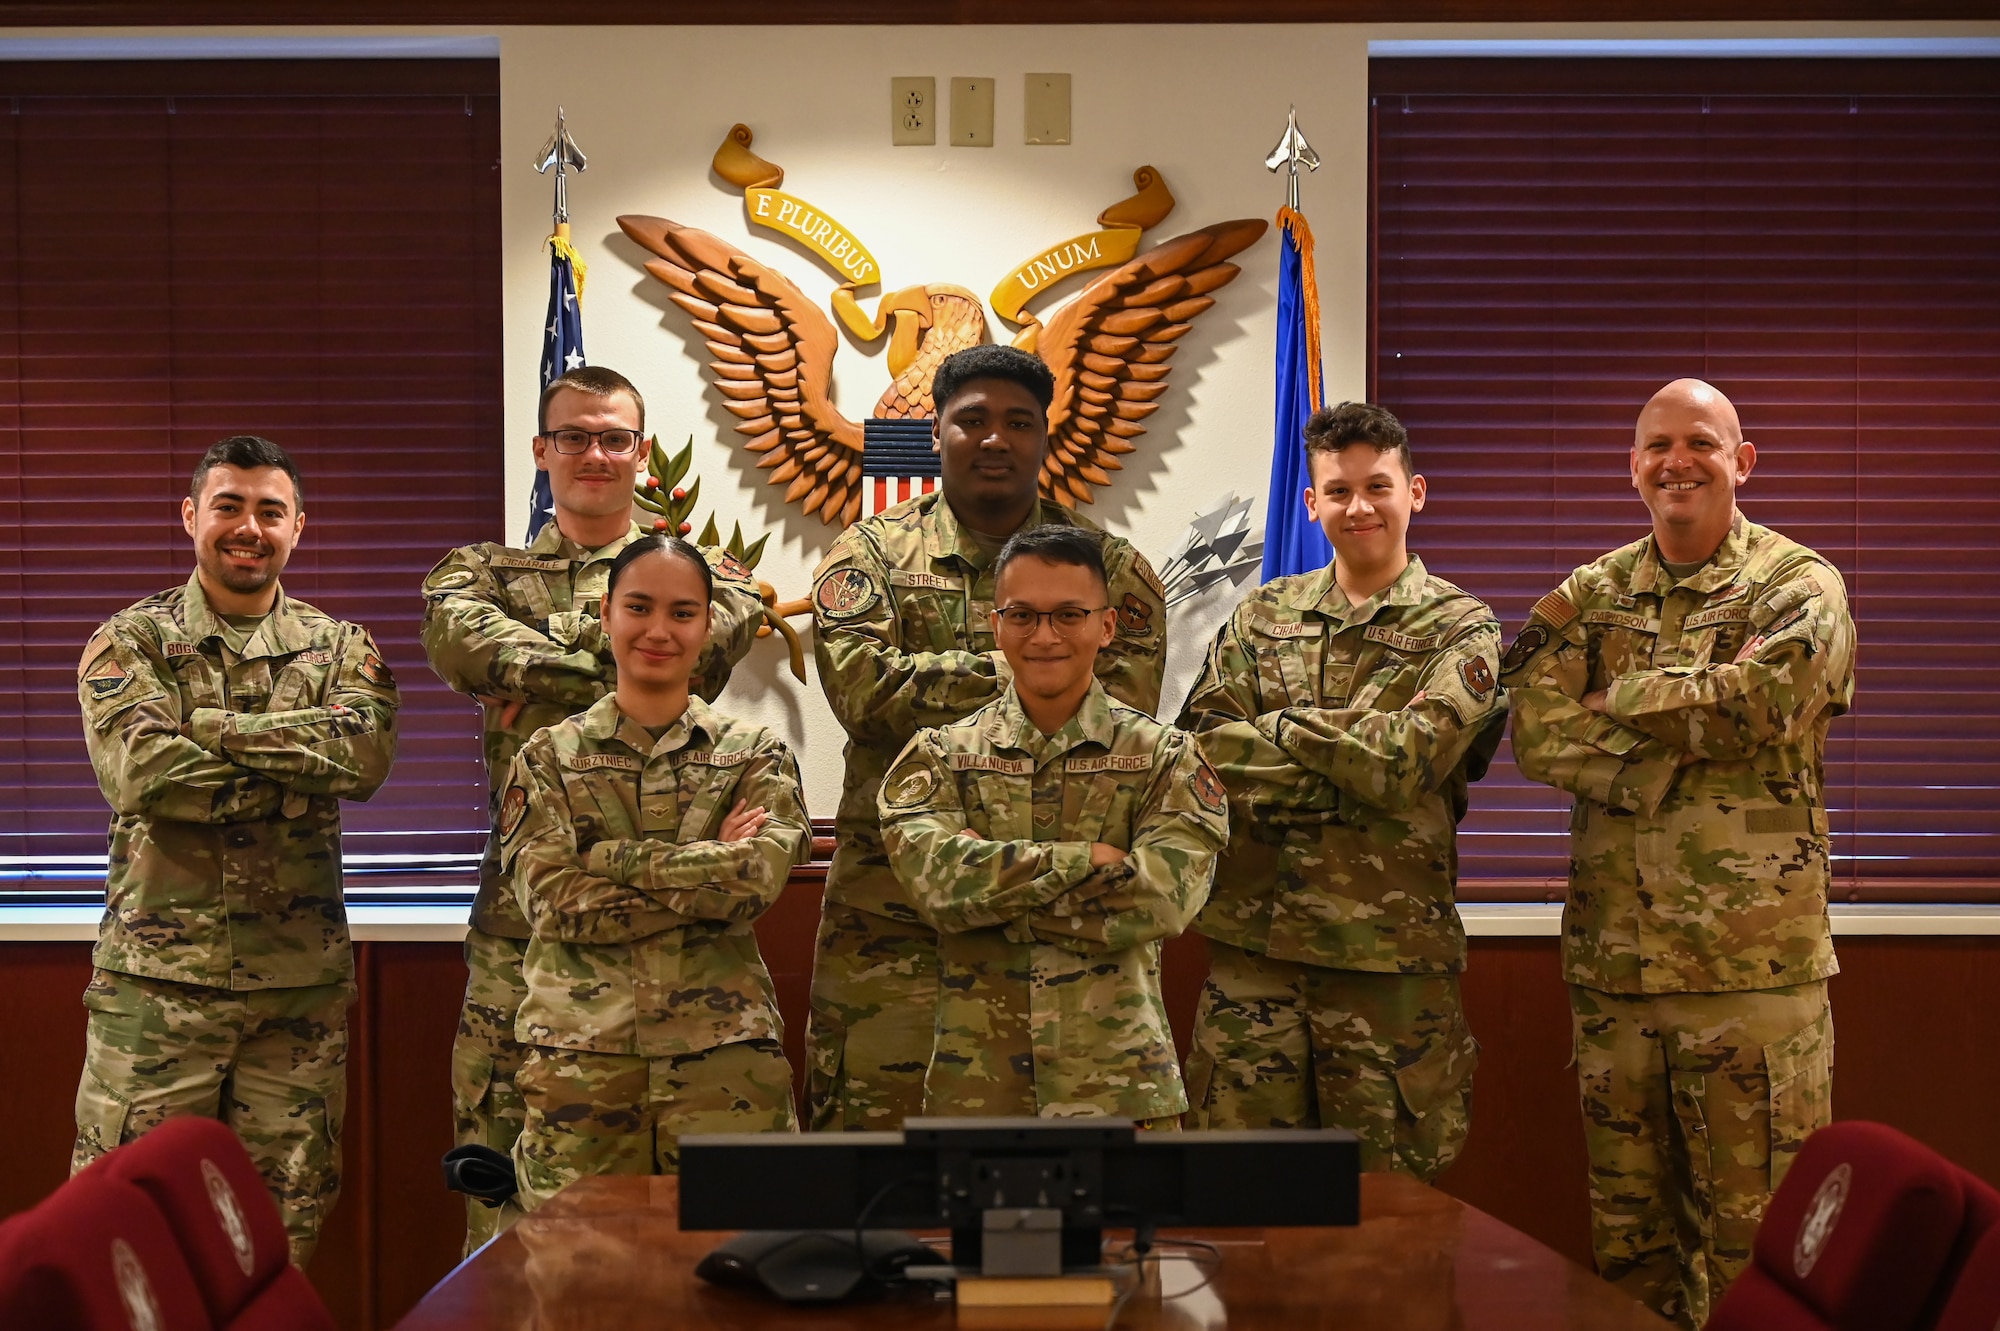 Members of the Laughlin Air Force Base Gaming Team pose with U.S. Air Force Col. Kevin Davidson (far right), 47th Flying Training Wing commander, during a visit and recognition of the team’s first tournament participation at Laughlin Air Force Base, Texas, July 10, 2023.